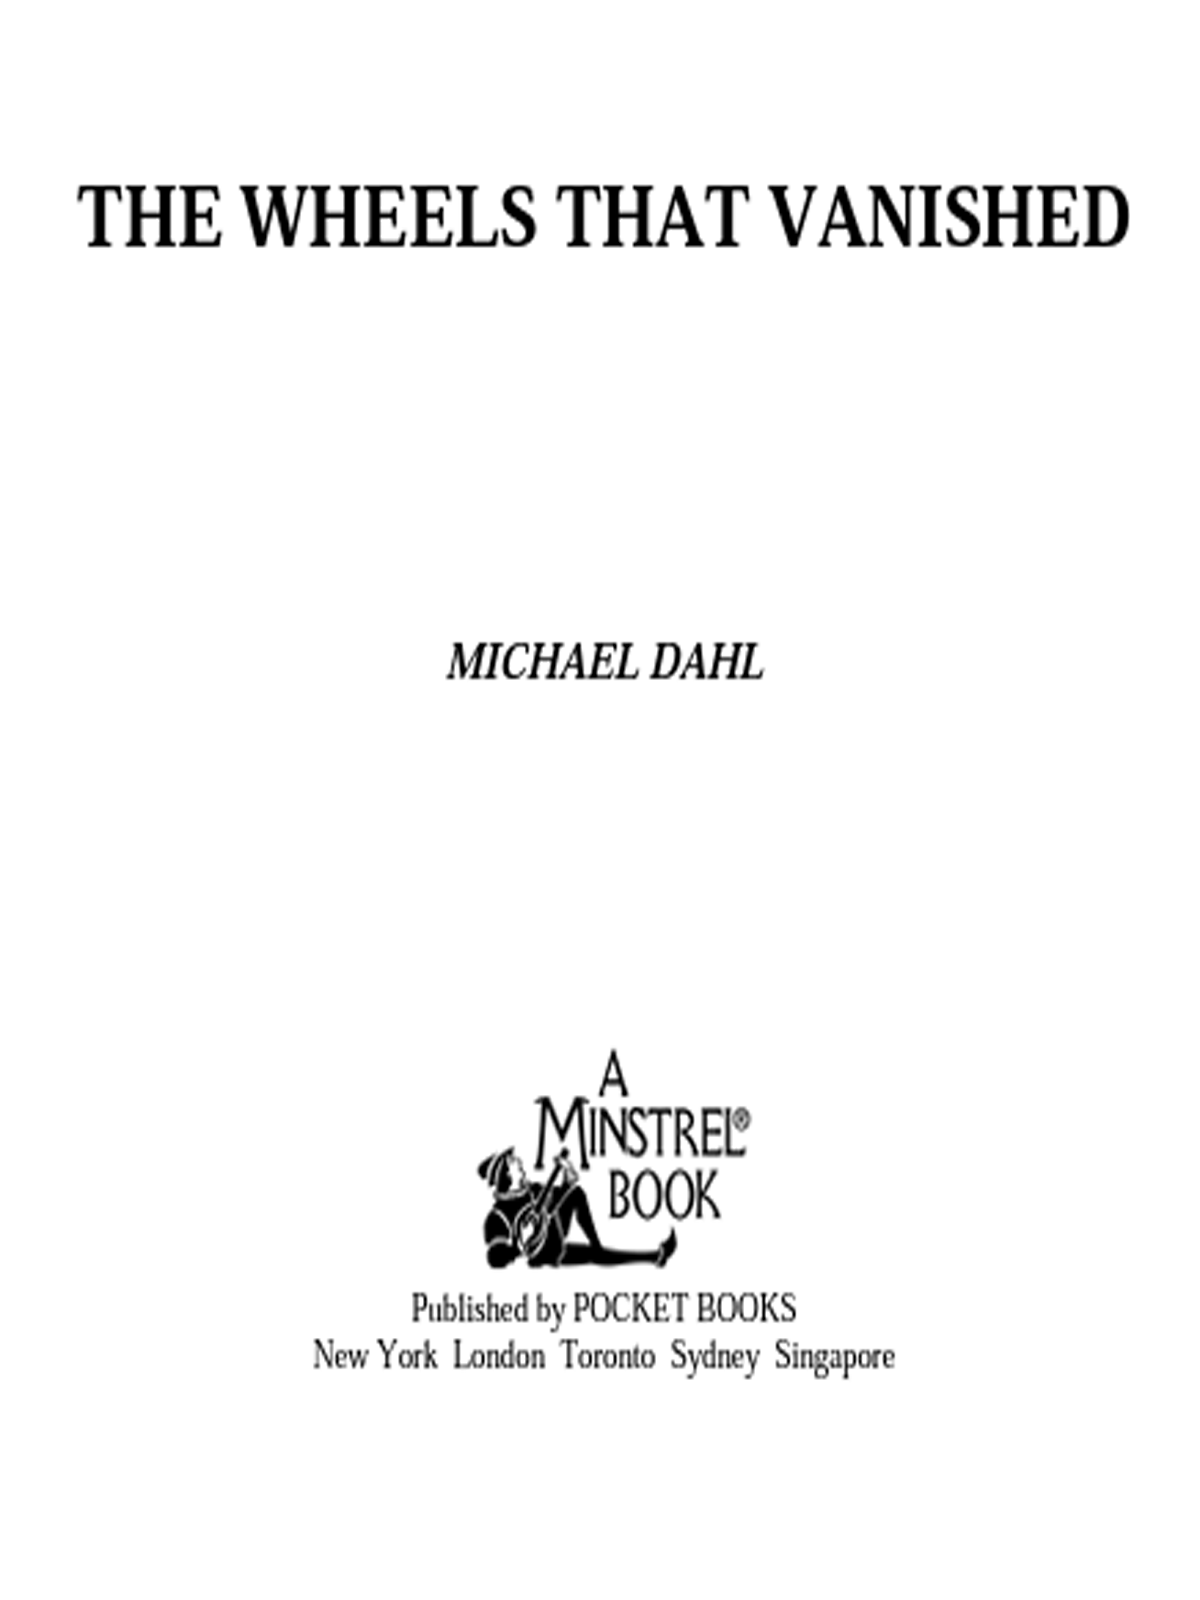 The Wheels that Vanished